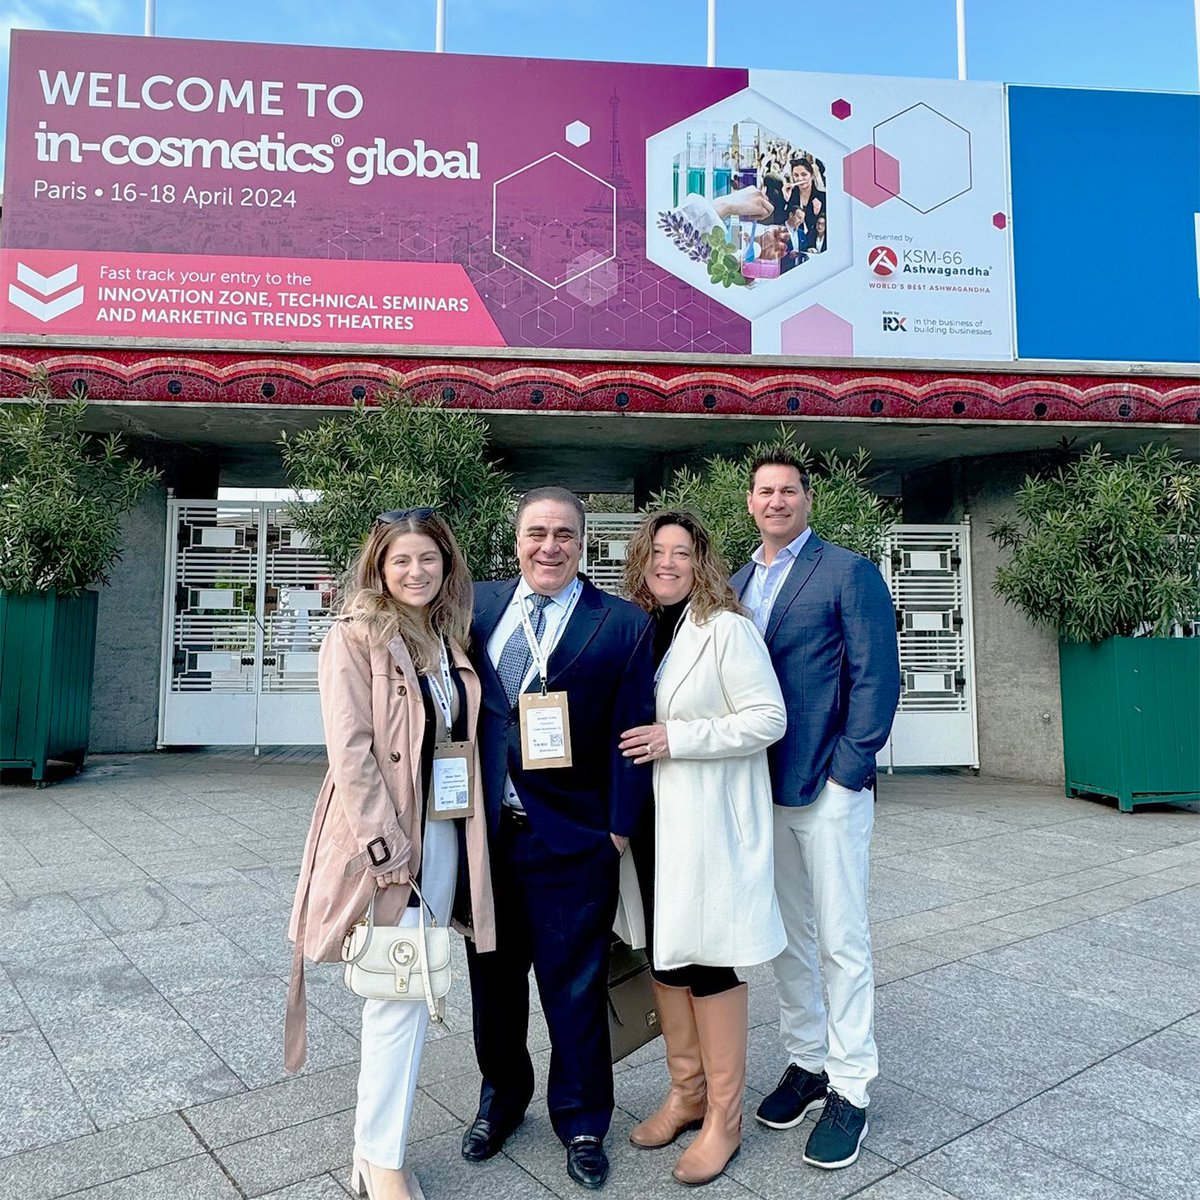 Personal care creators and ingredients came together at in-cosmetics® Global in Paris, France. The Coast Southwest team enjoyed connecting with the industry’s most innovative personal care ingredient suppliers. Enchanté. #ingredientsforsuccess #incosglobal